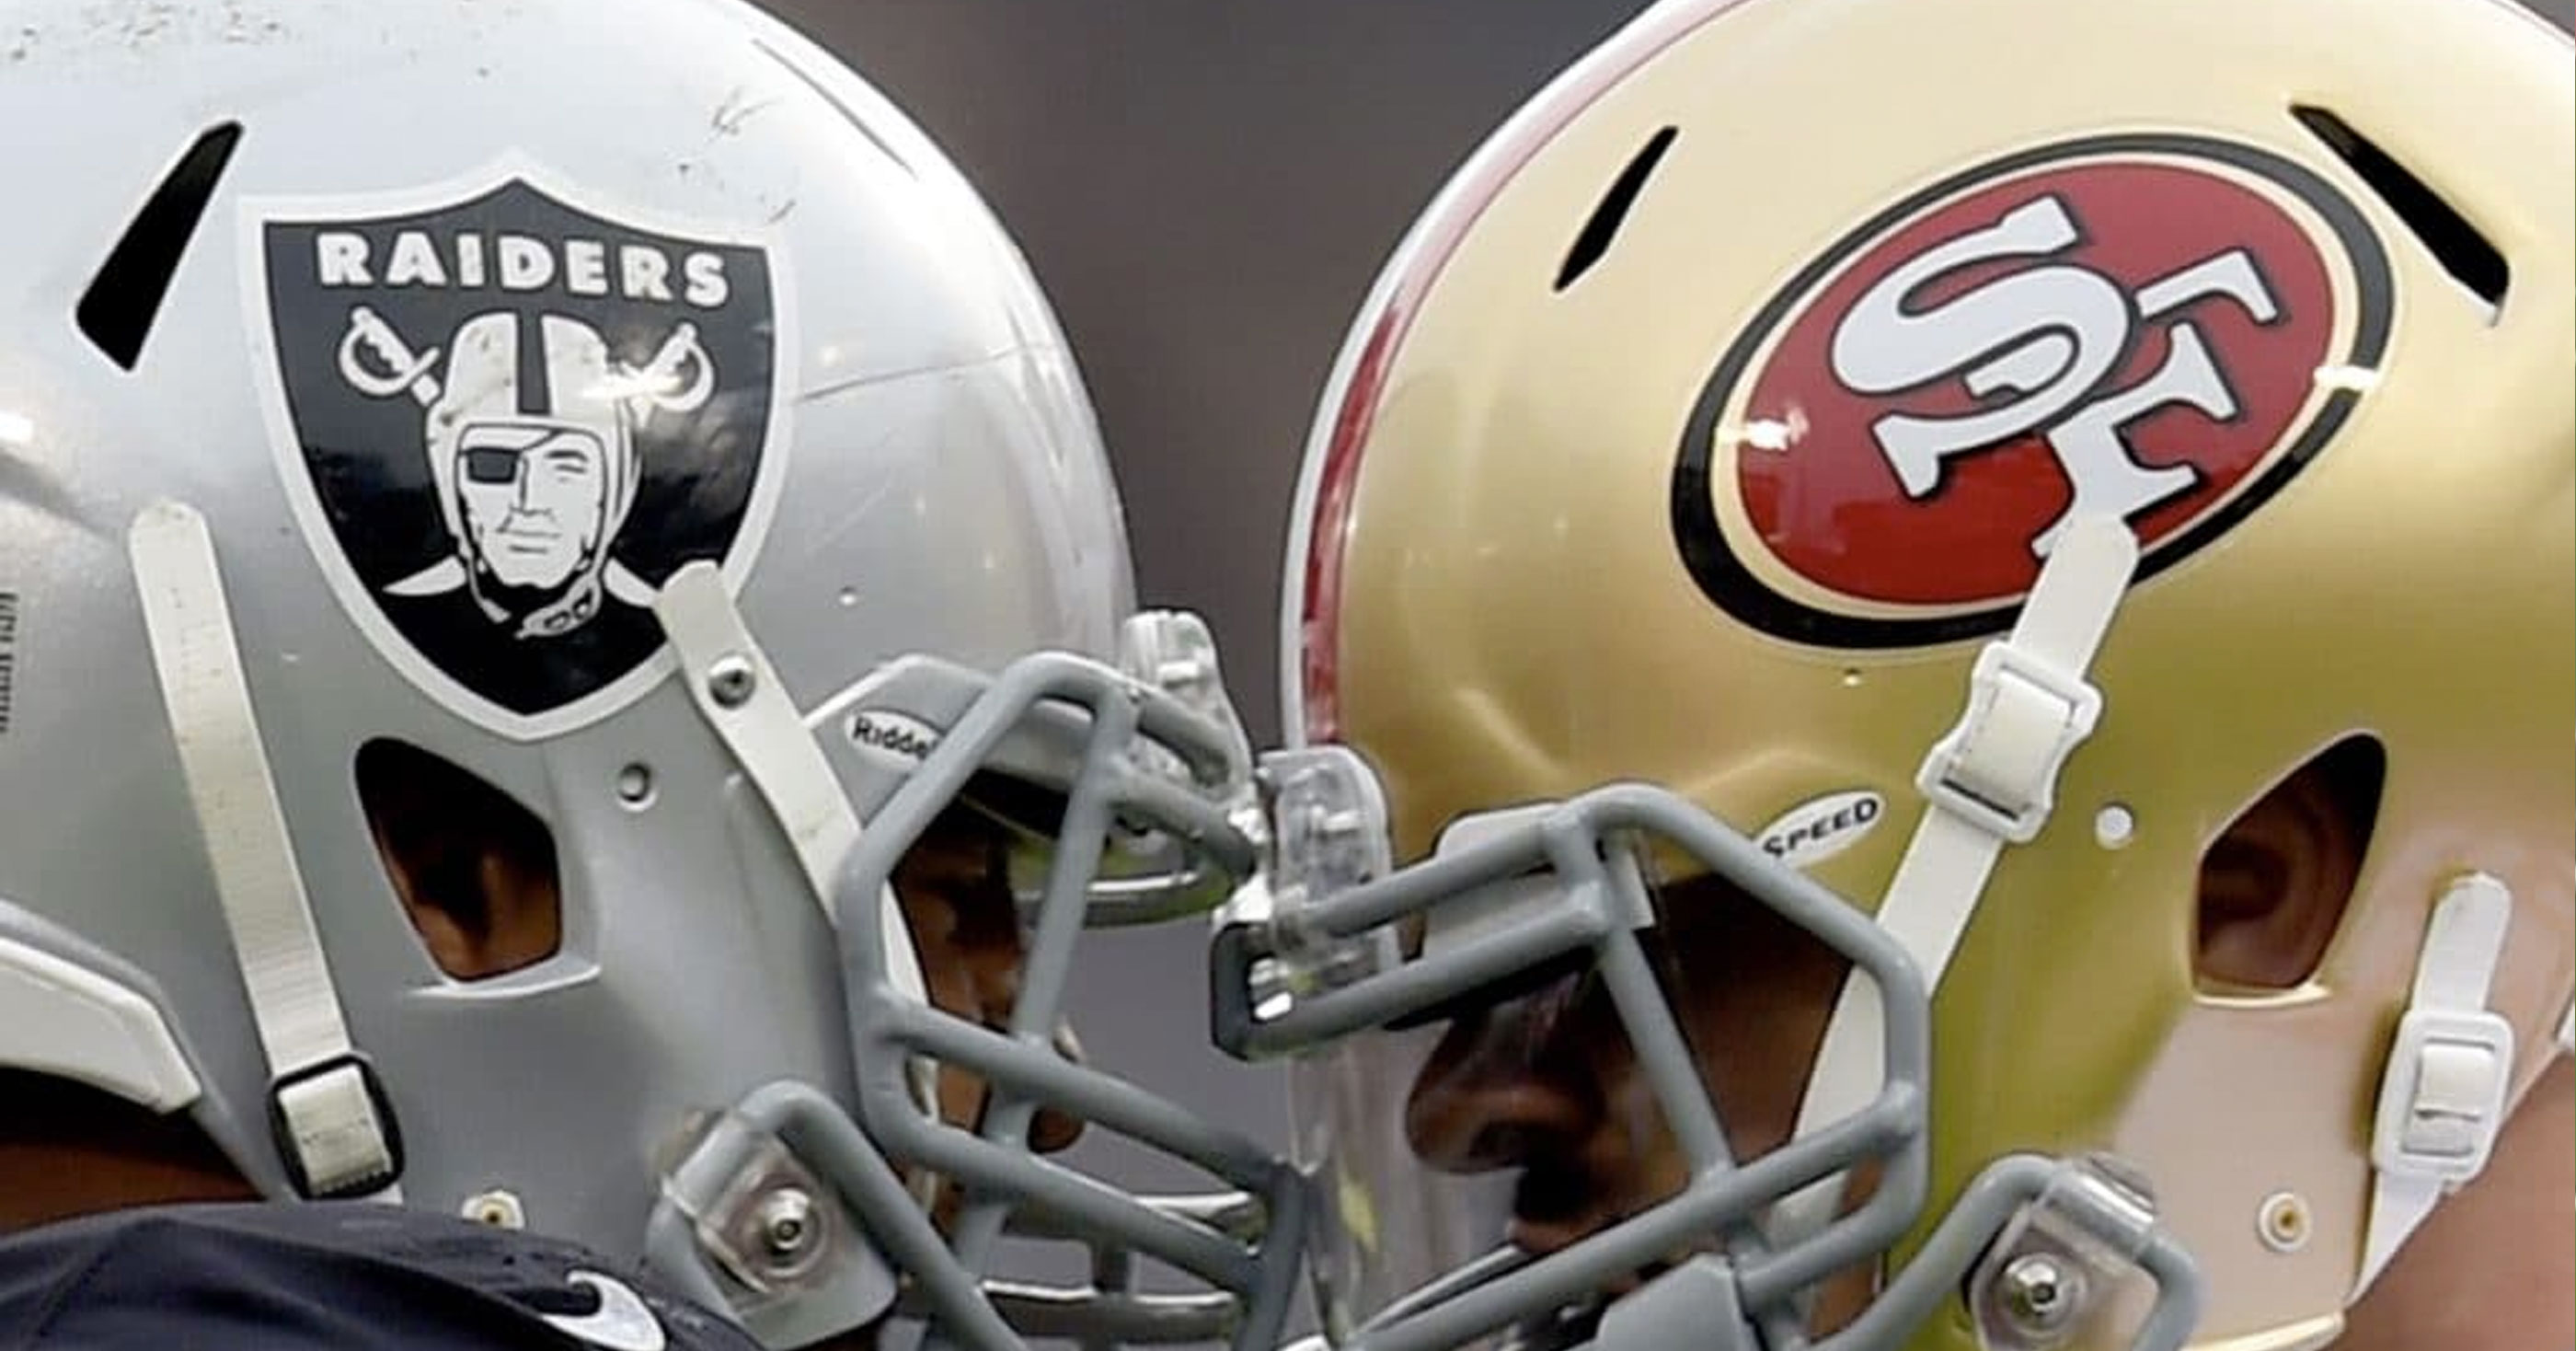 Tonight's Raiders-49ers Game Is Statistically The Worst Primetime NFL Matchup In 50 Years2800 x 1468